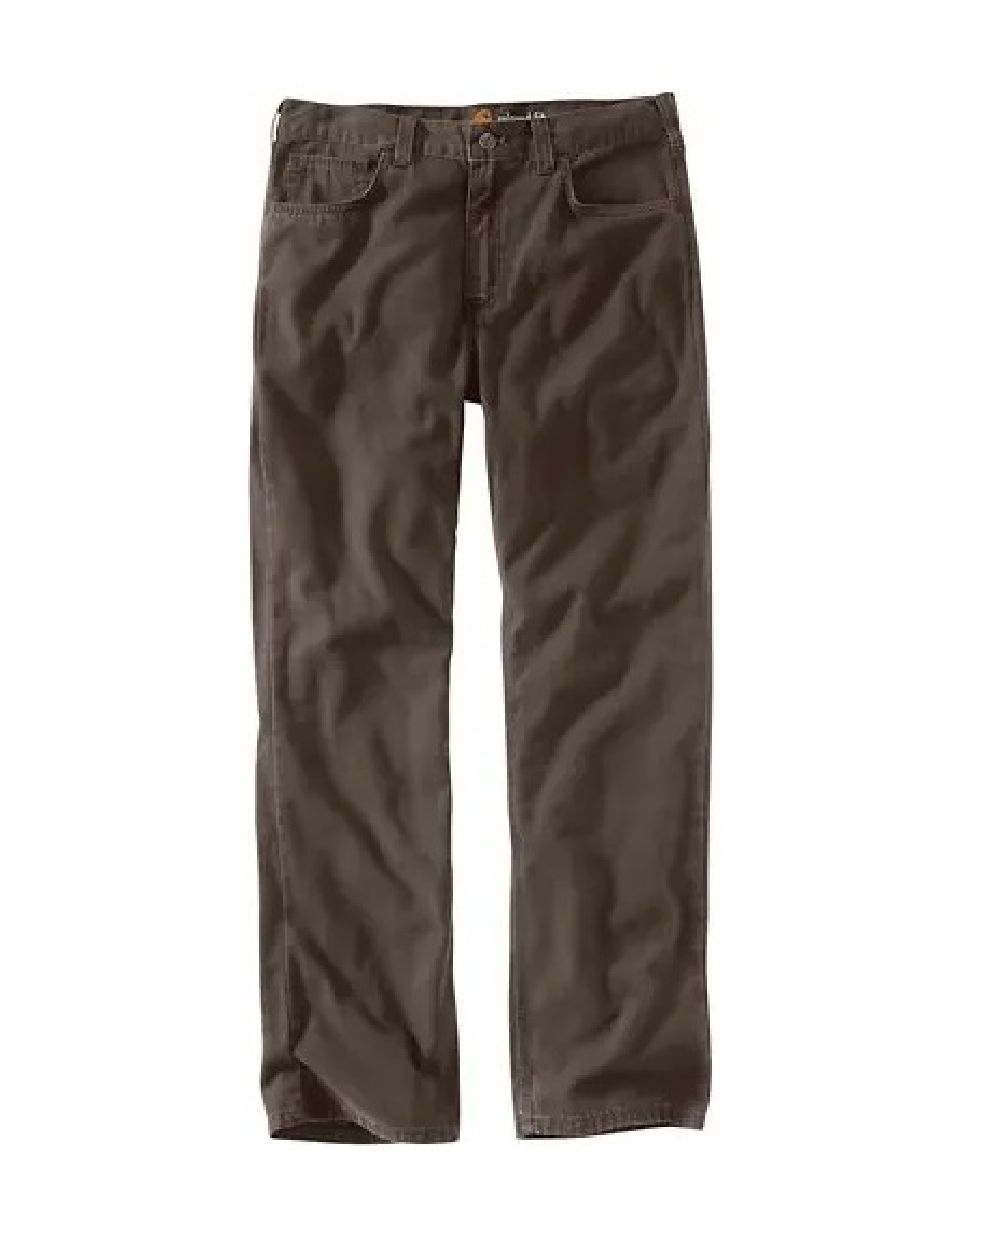 Men's Carhartt Rigby Rugged Flex Relaxed-Fit 5 Pocket Pant